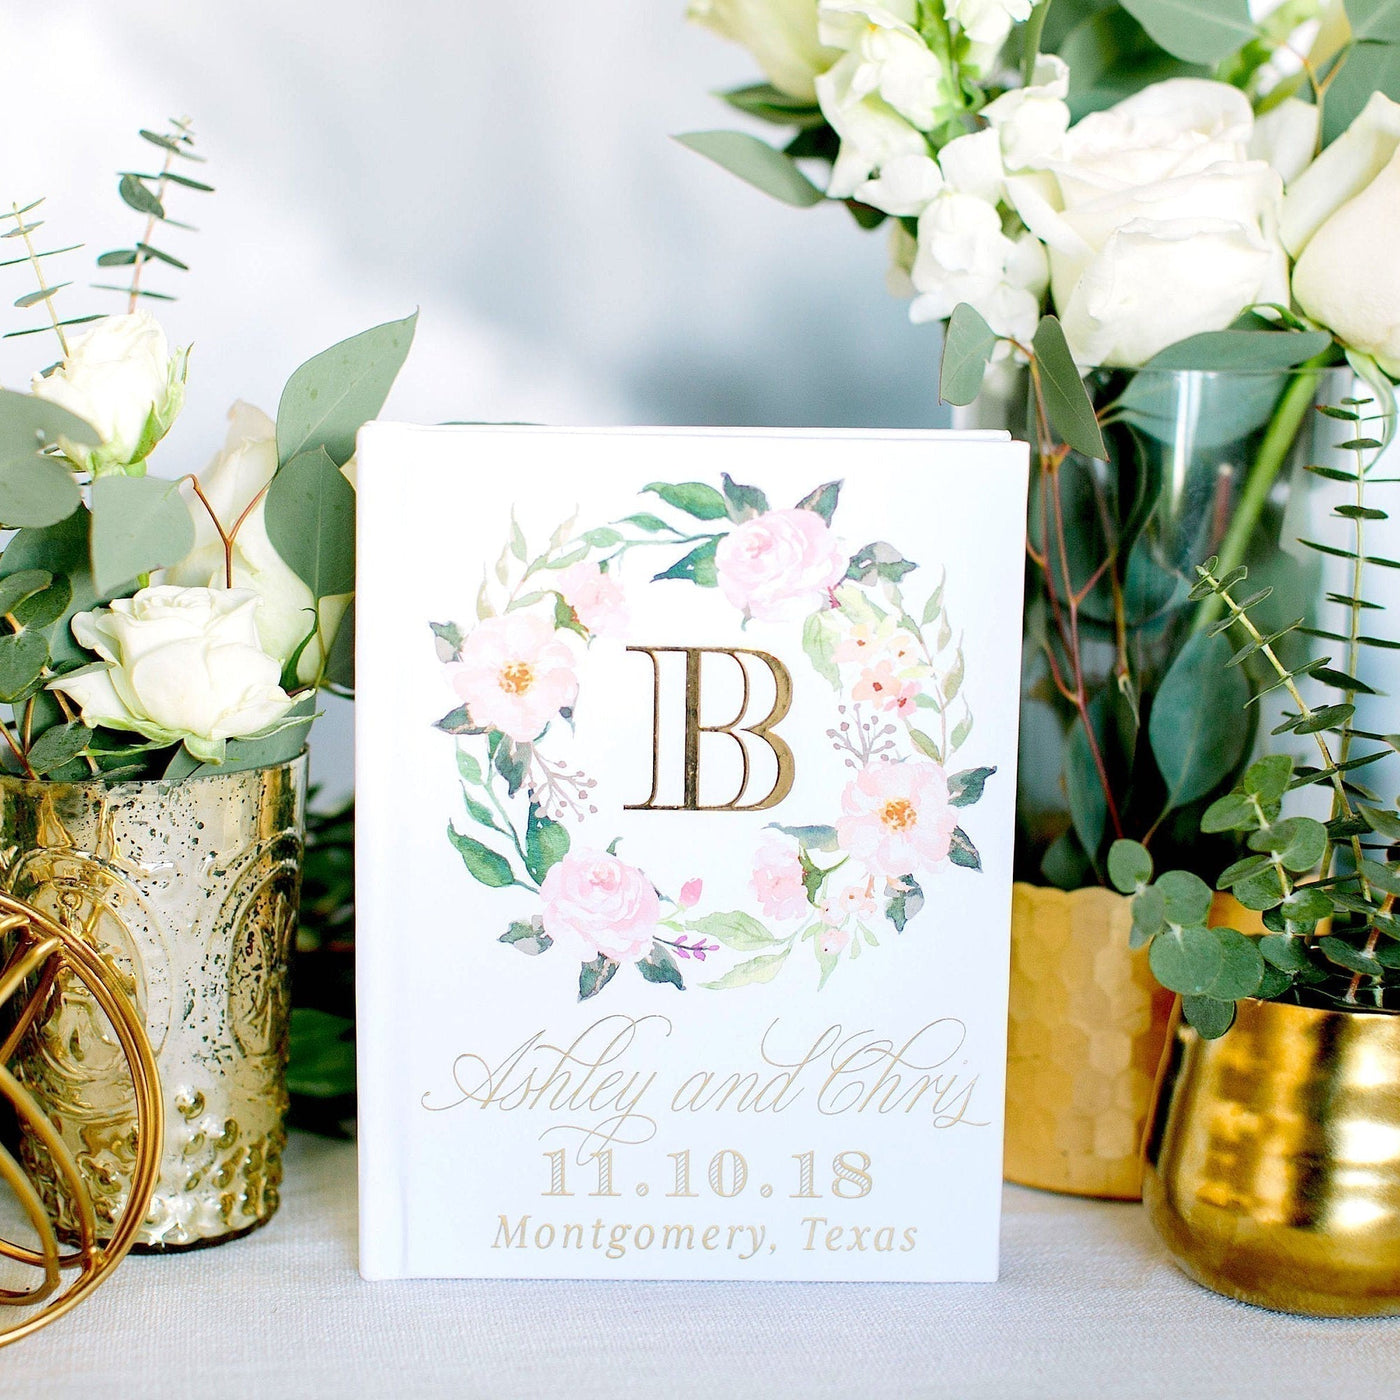 Last Name Initial Wedding Guest Book